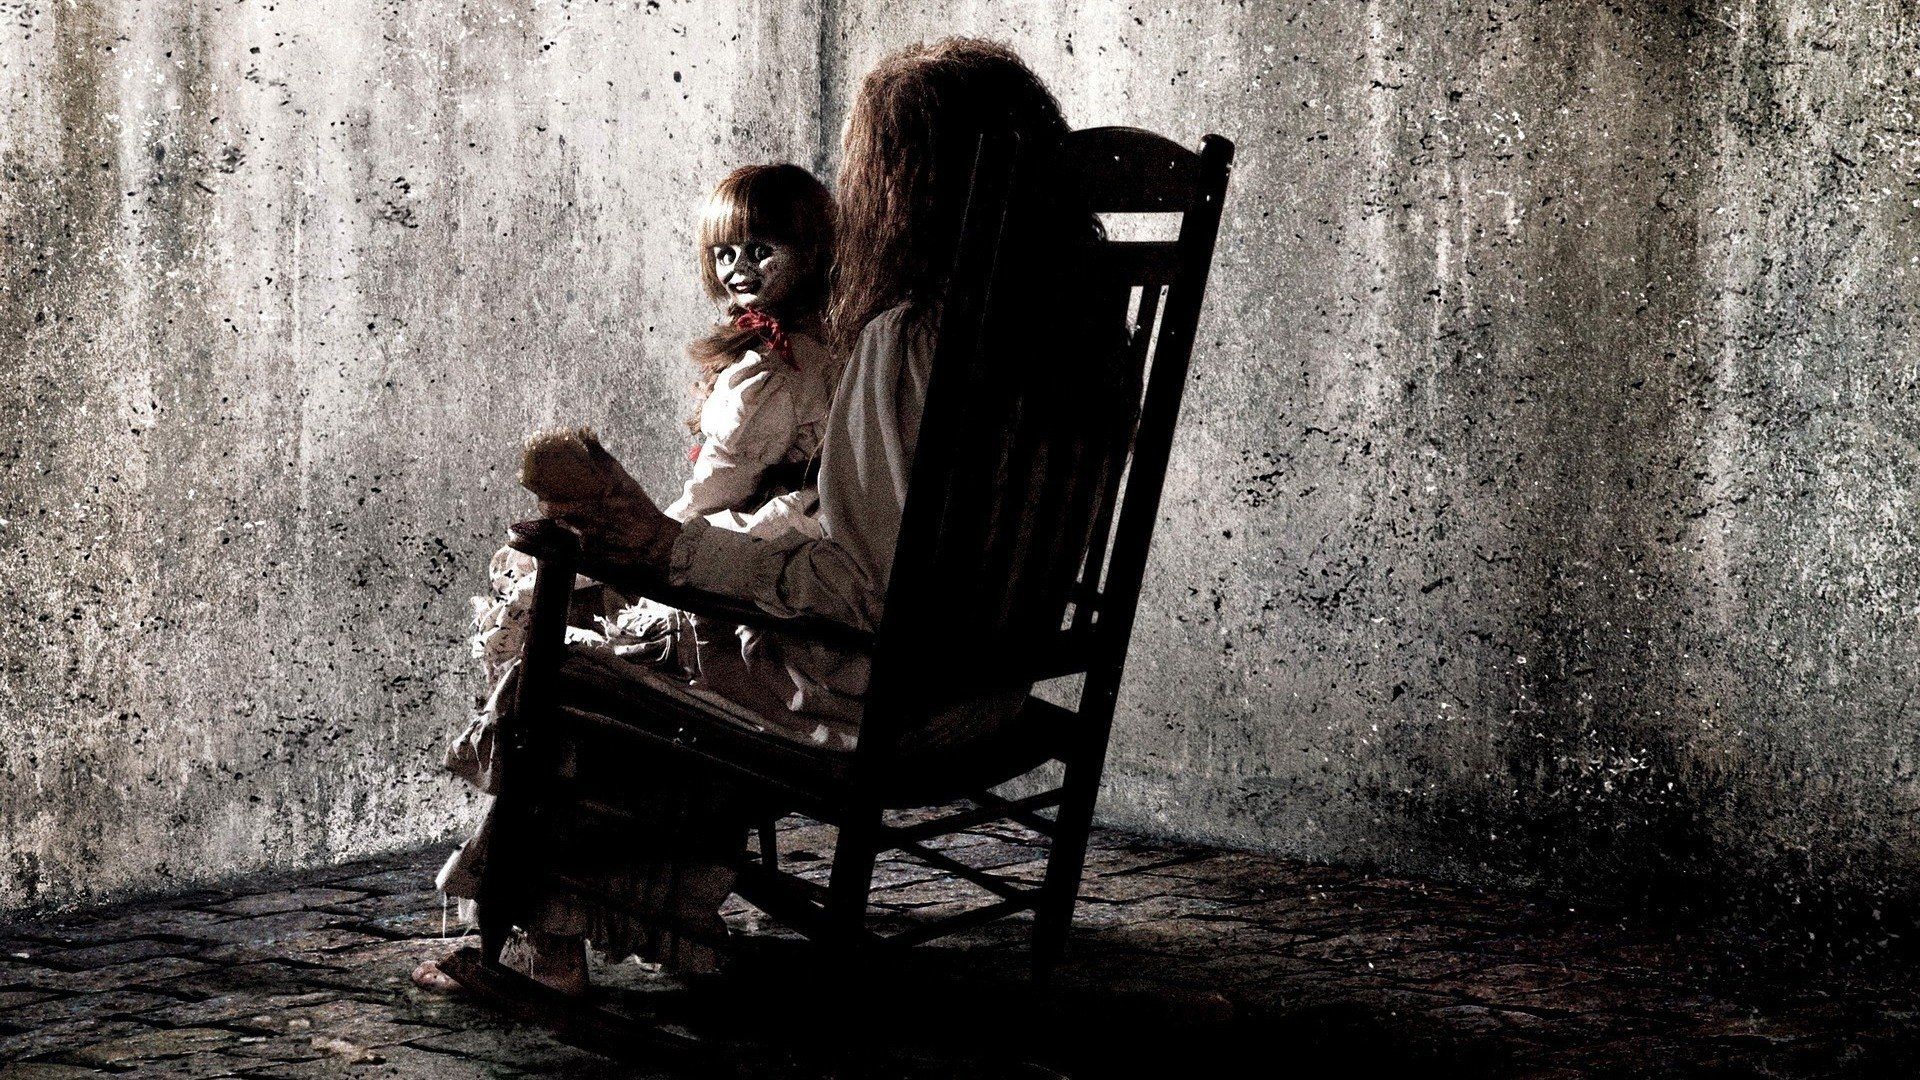 Promotional art for the 2013 horror movie The Conjuring.